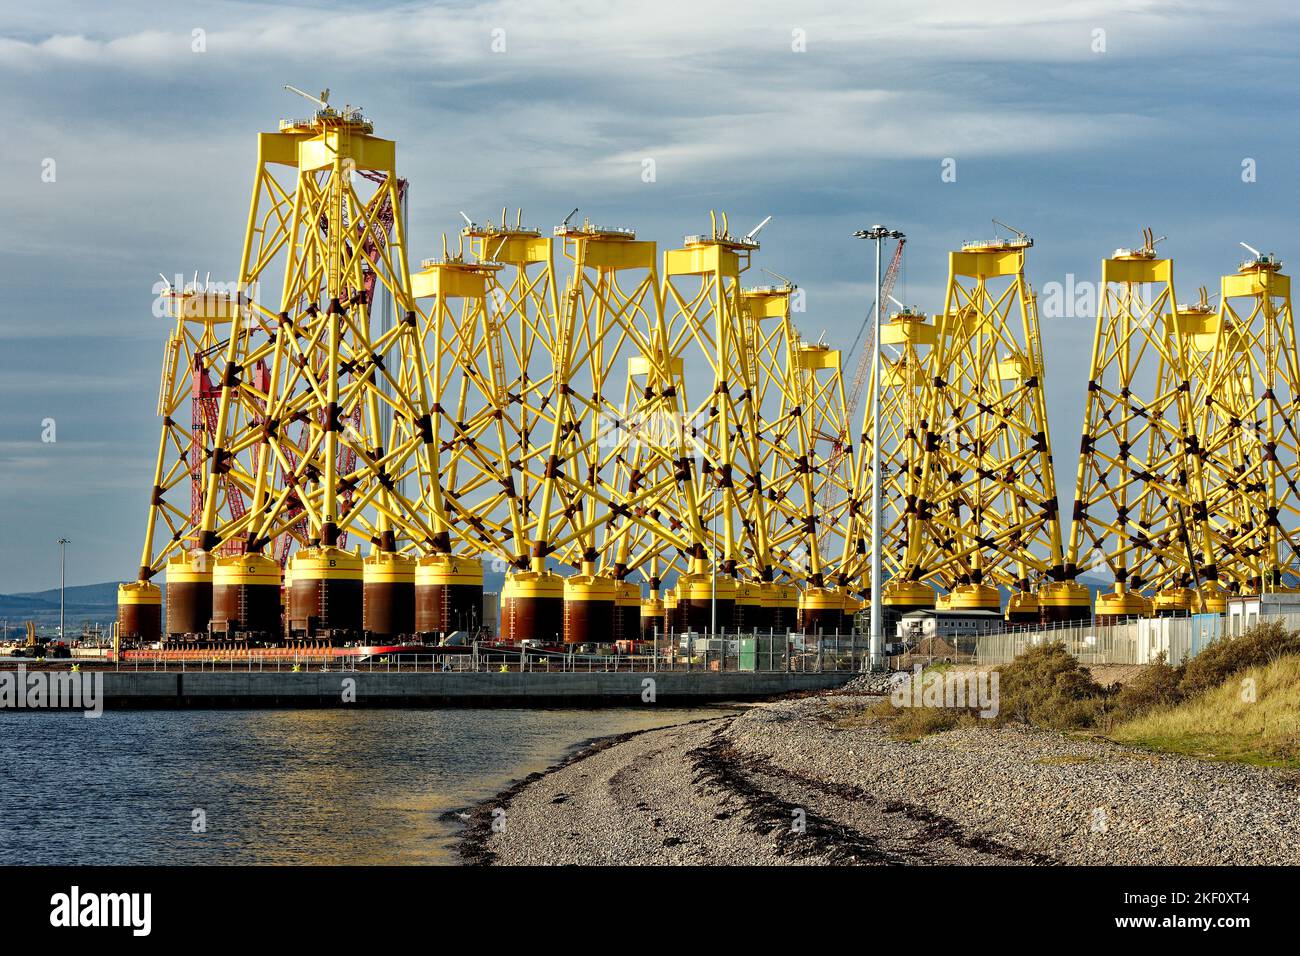 Cromarty Firth Scotland Nigg port rows of new yellow bases or yellow jackets for off shore wind turbines Stock Photo